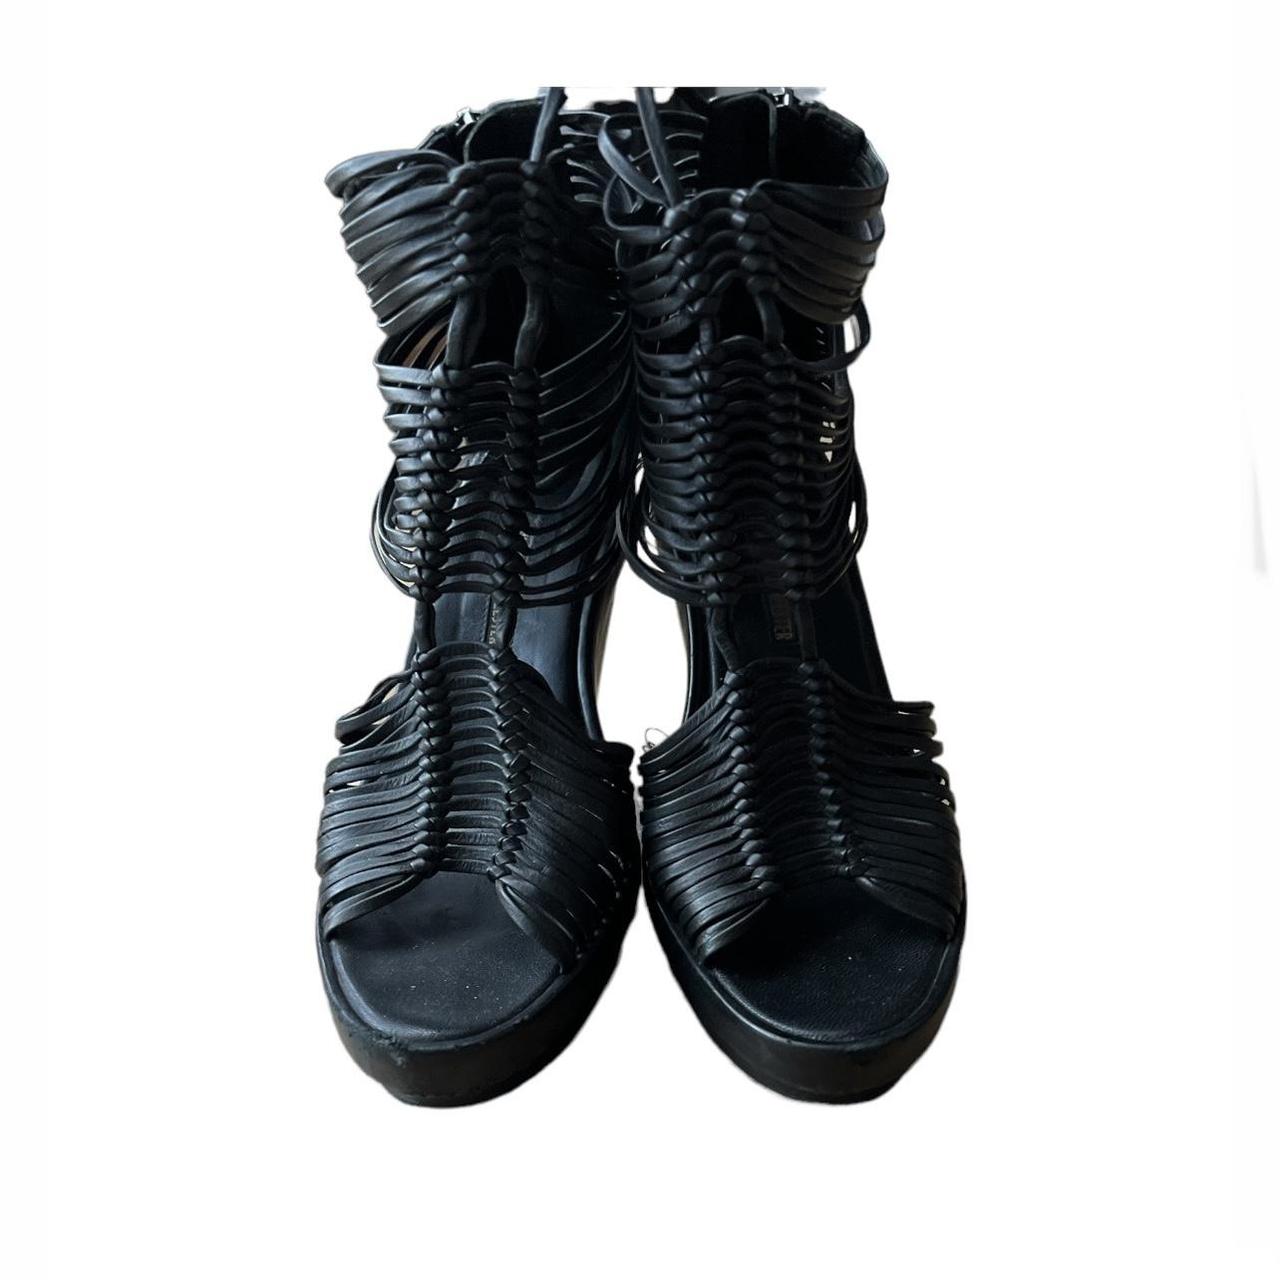 Product Image 2 - Ann Demeulemeester
Black multi-strap leather sandals